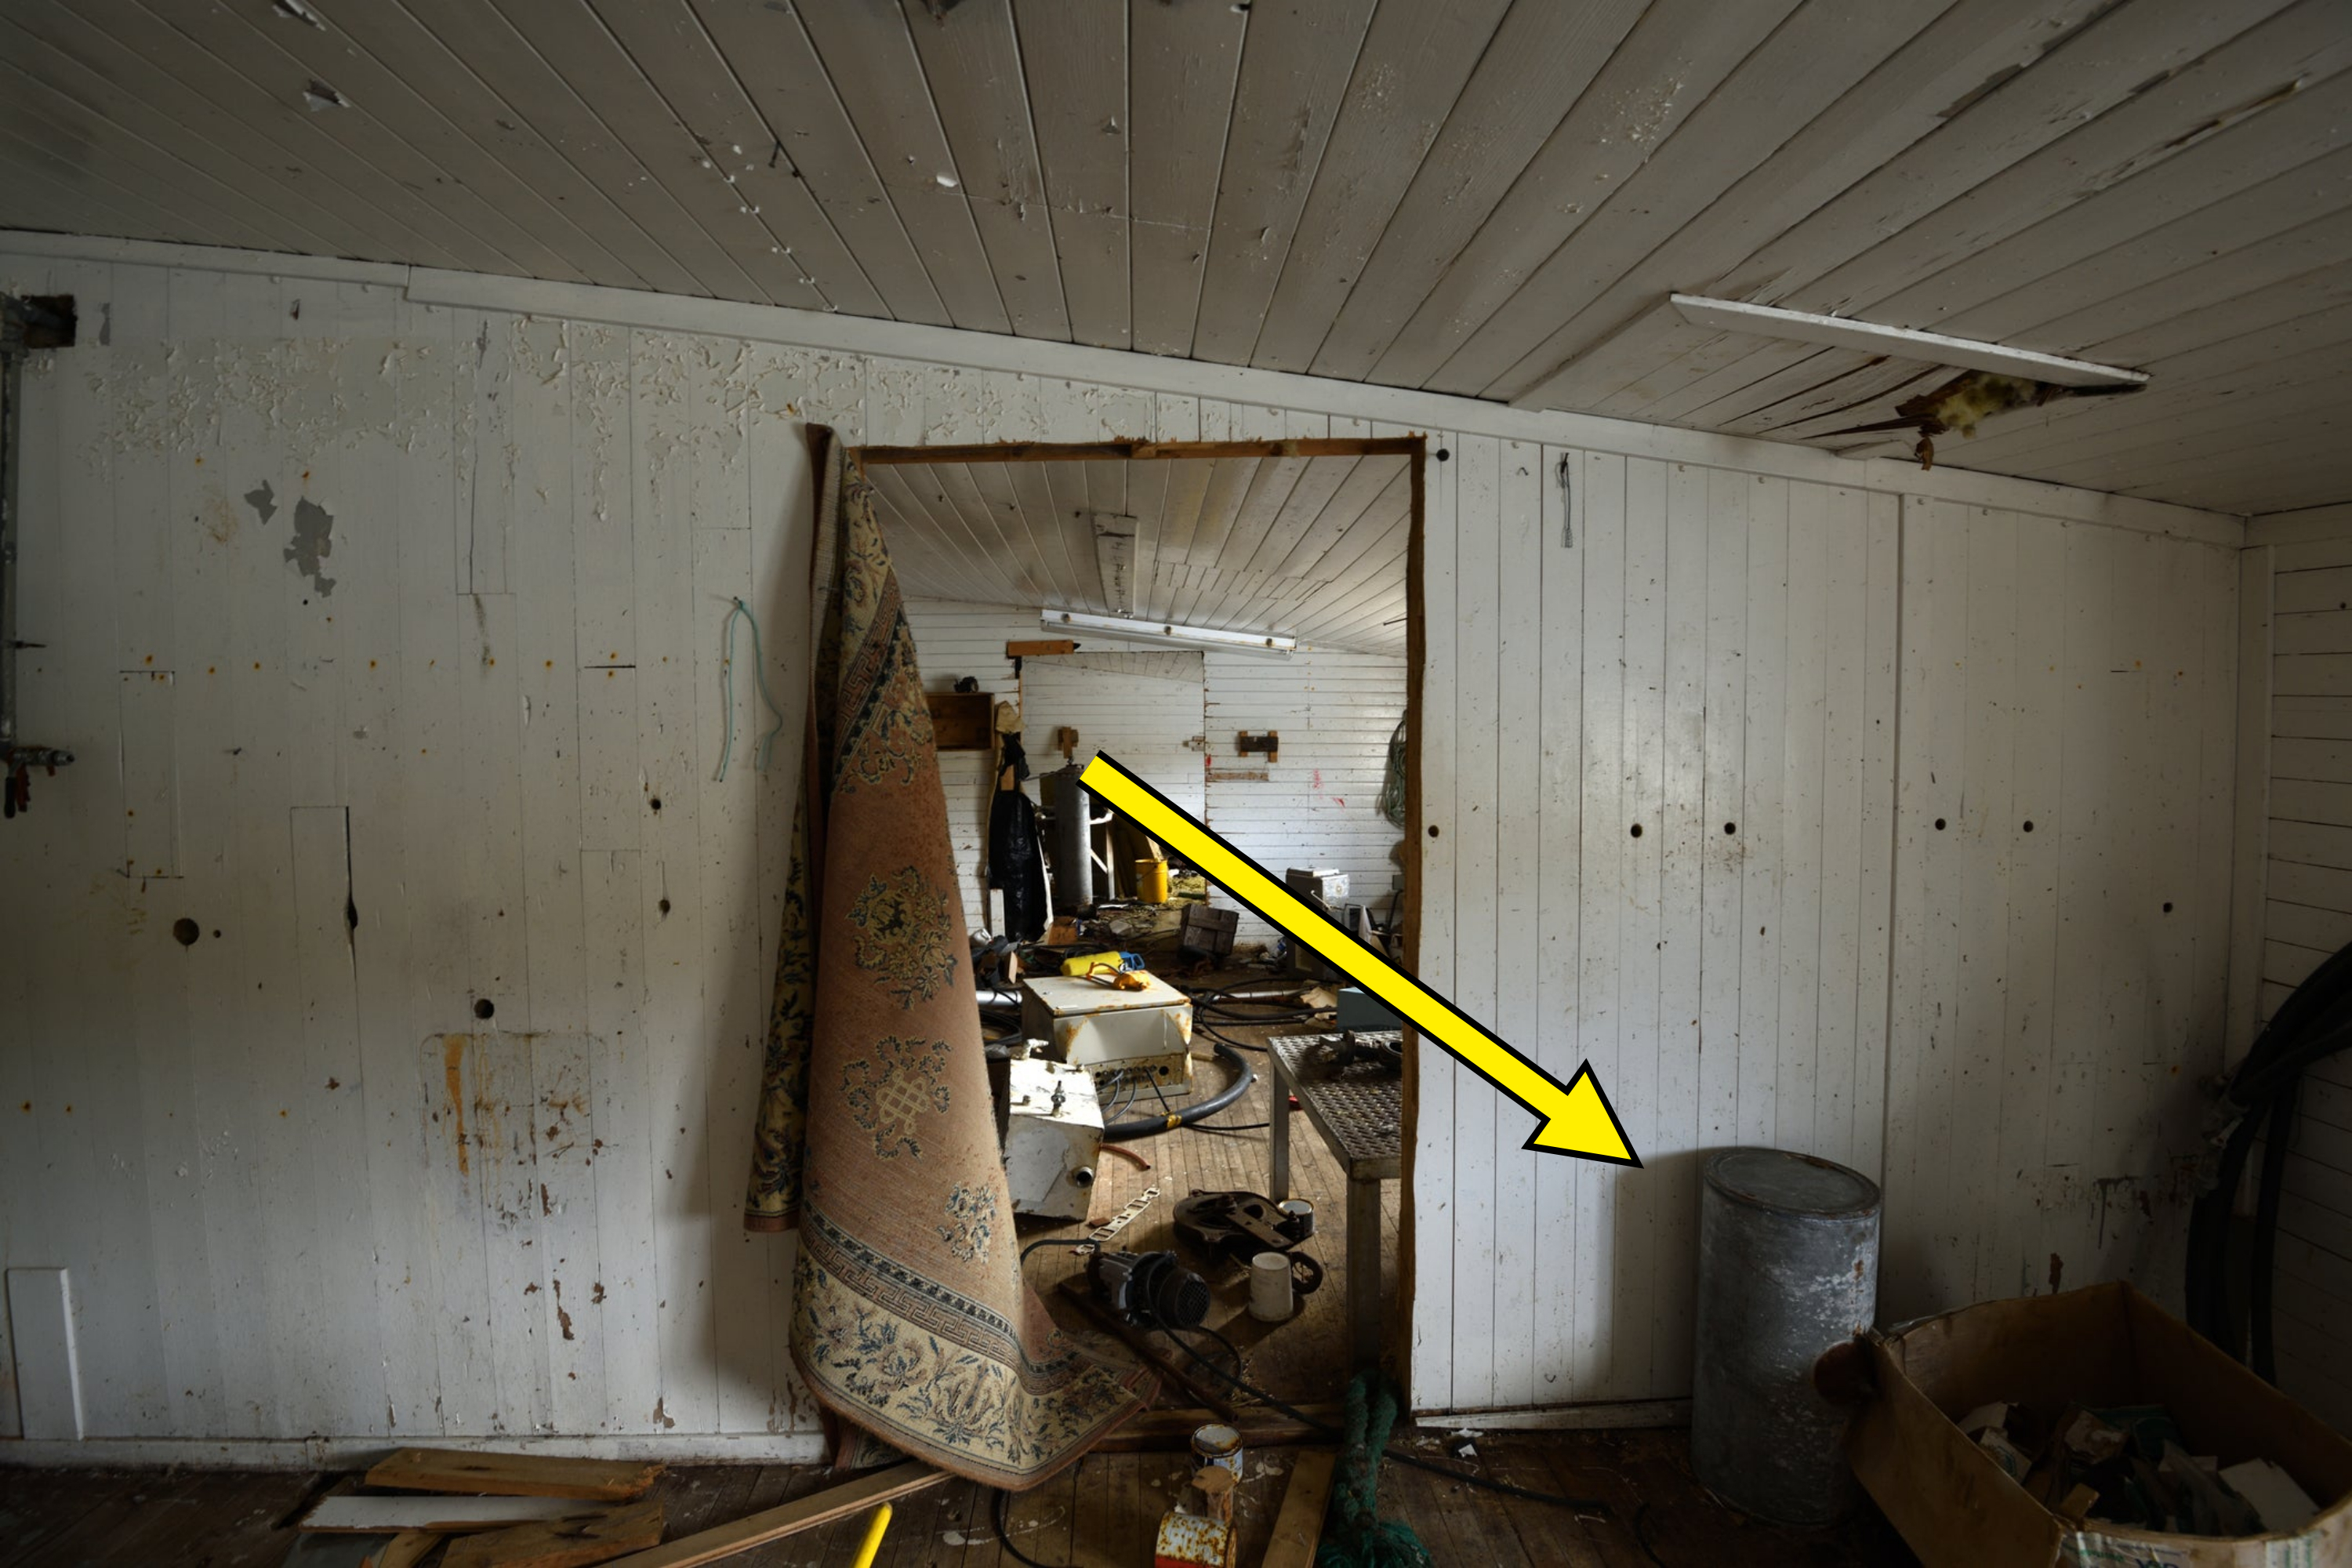 An arrow pointing to a barrel in a garage